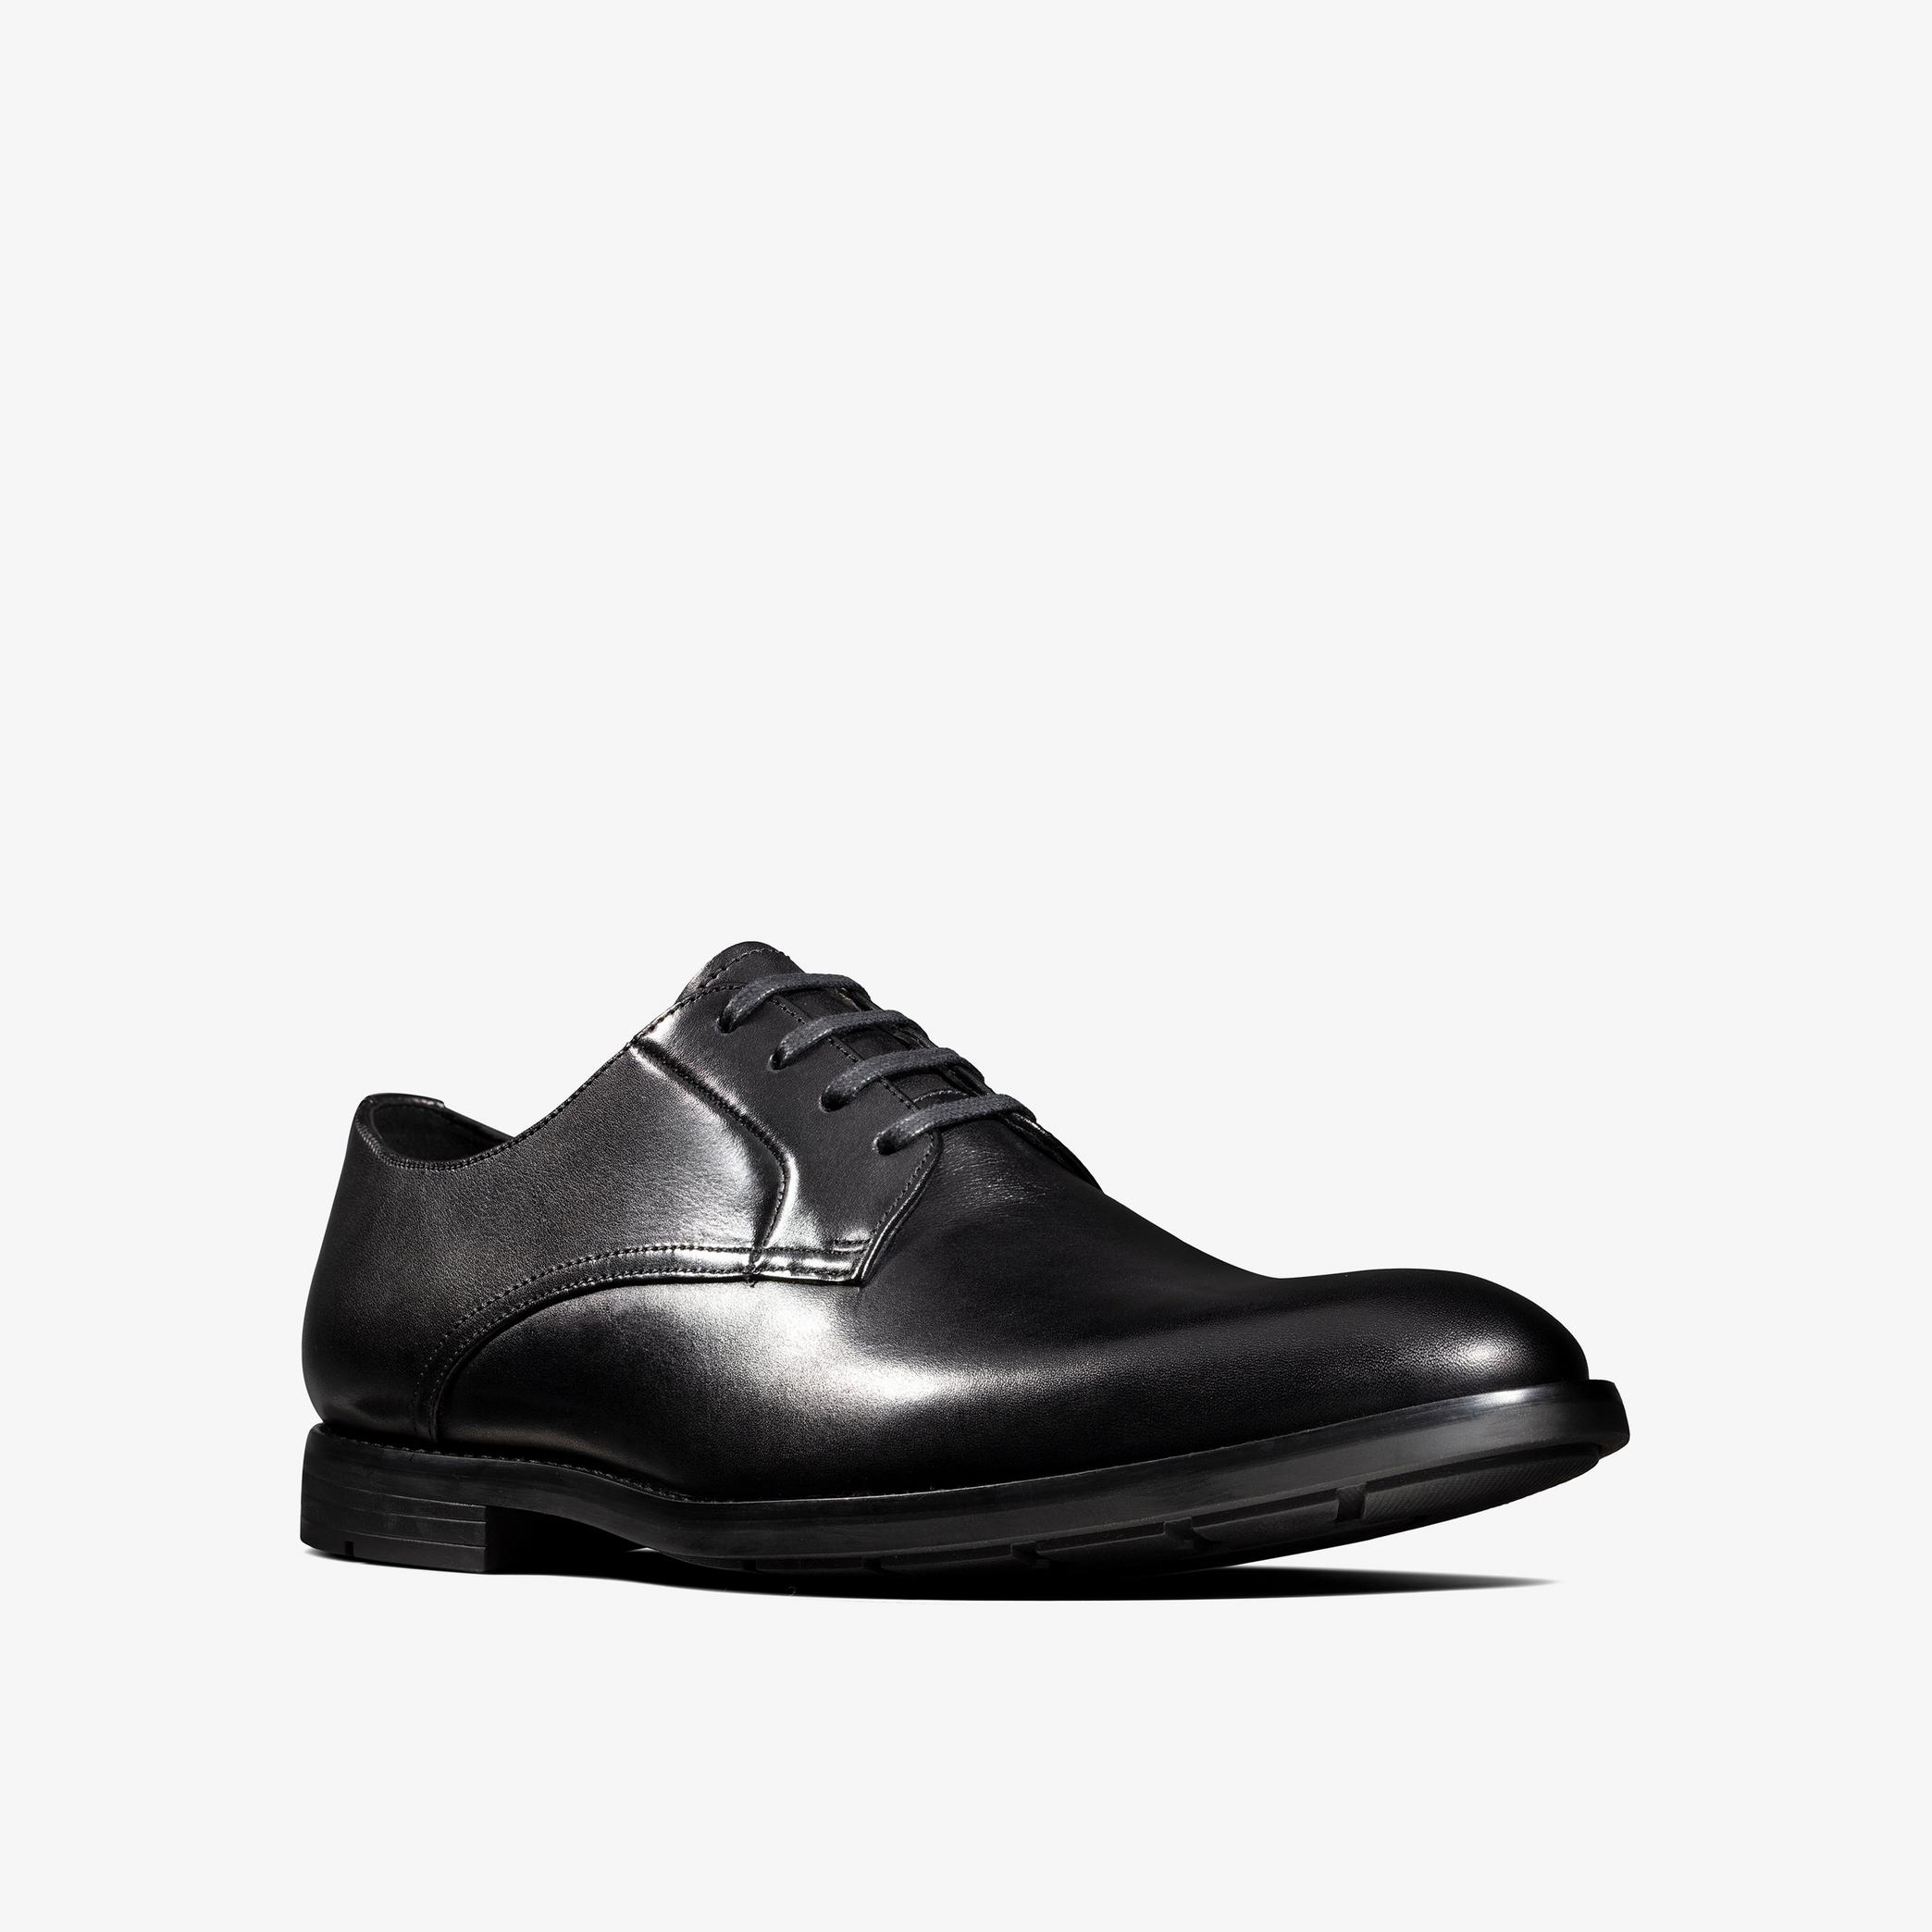 MENS Ronnie Walk Black Leather Derby Shoes | Clarks Outlet